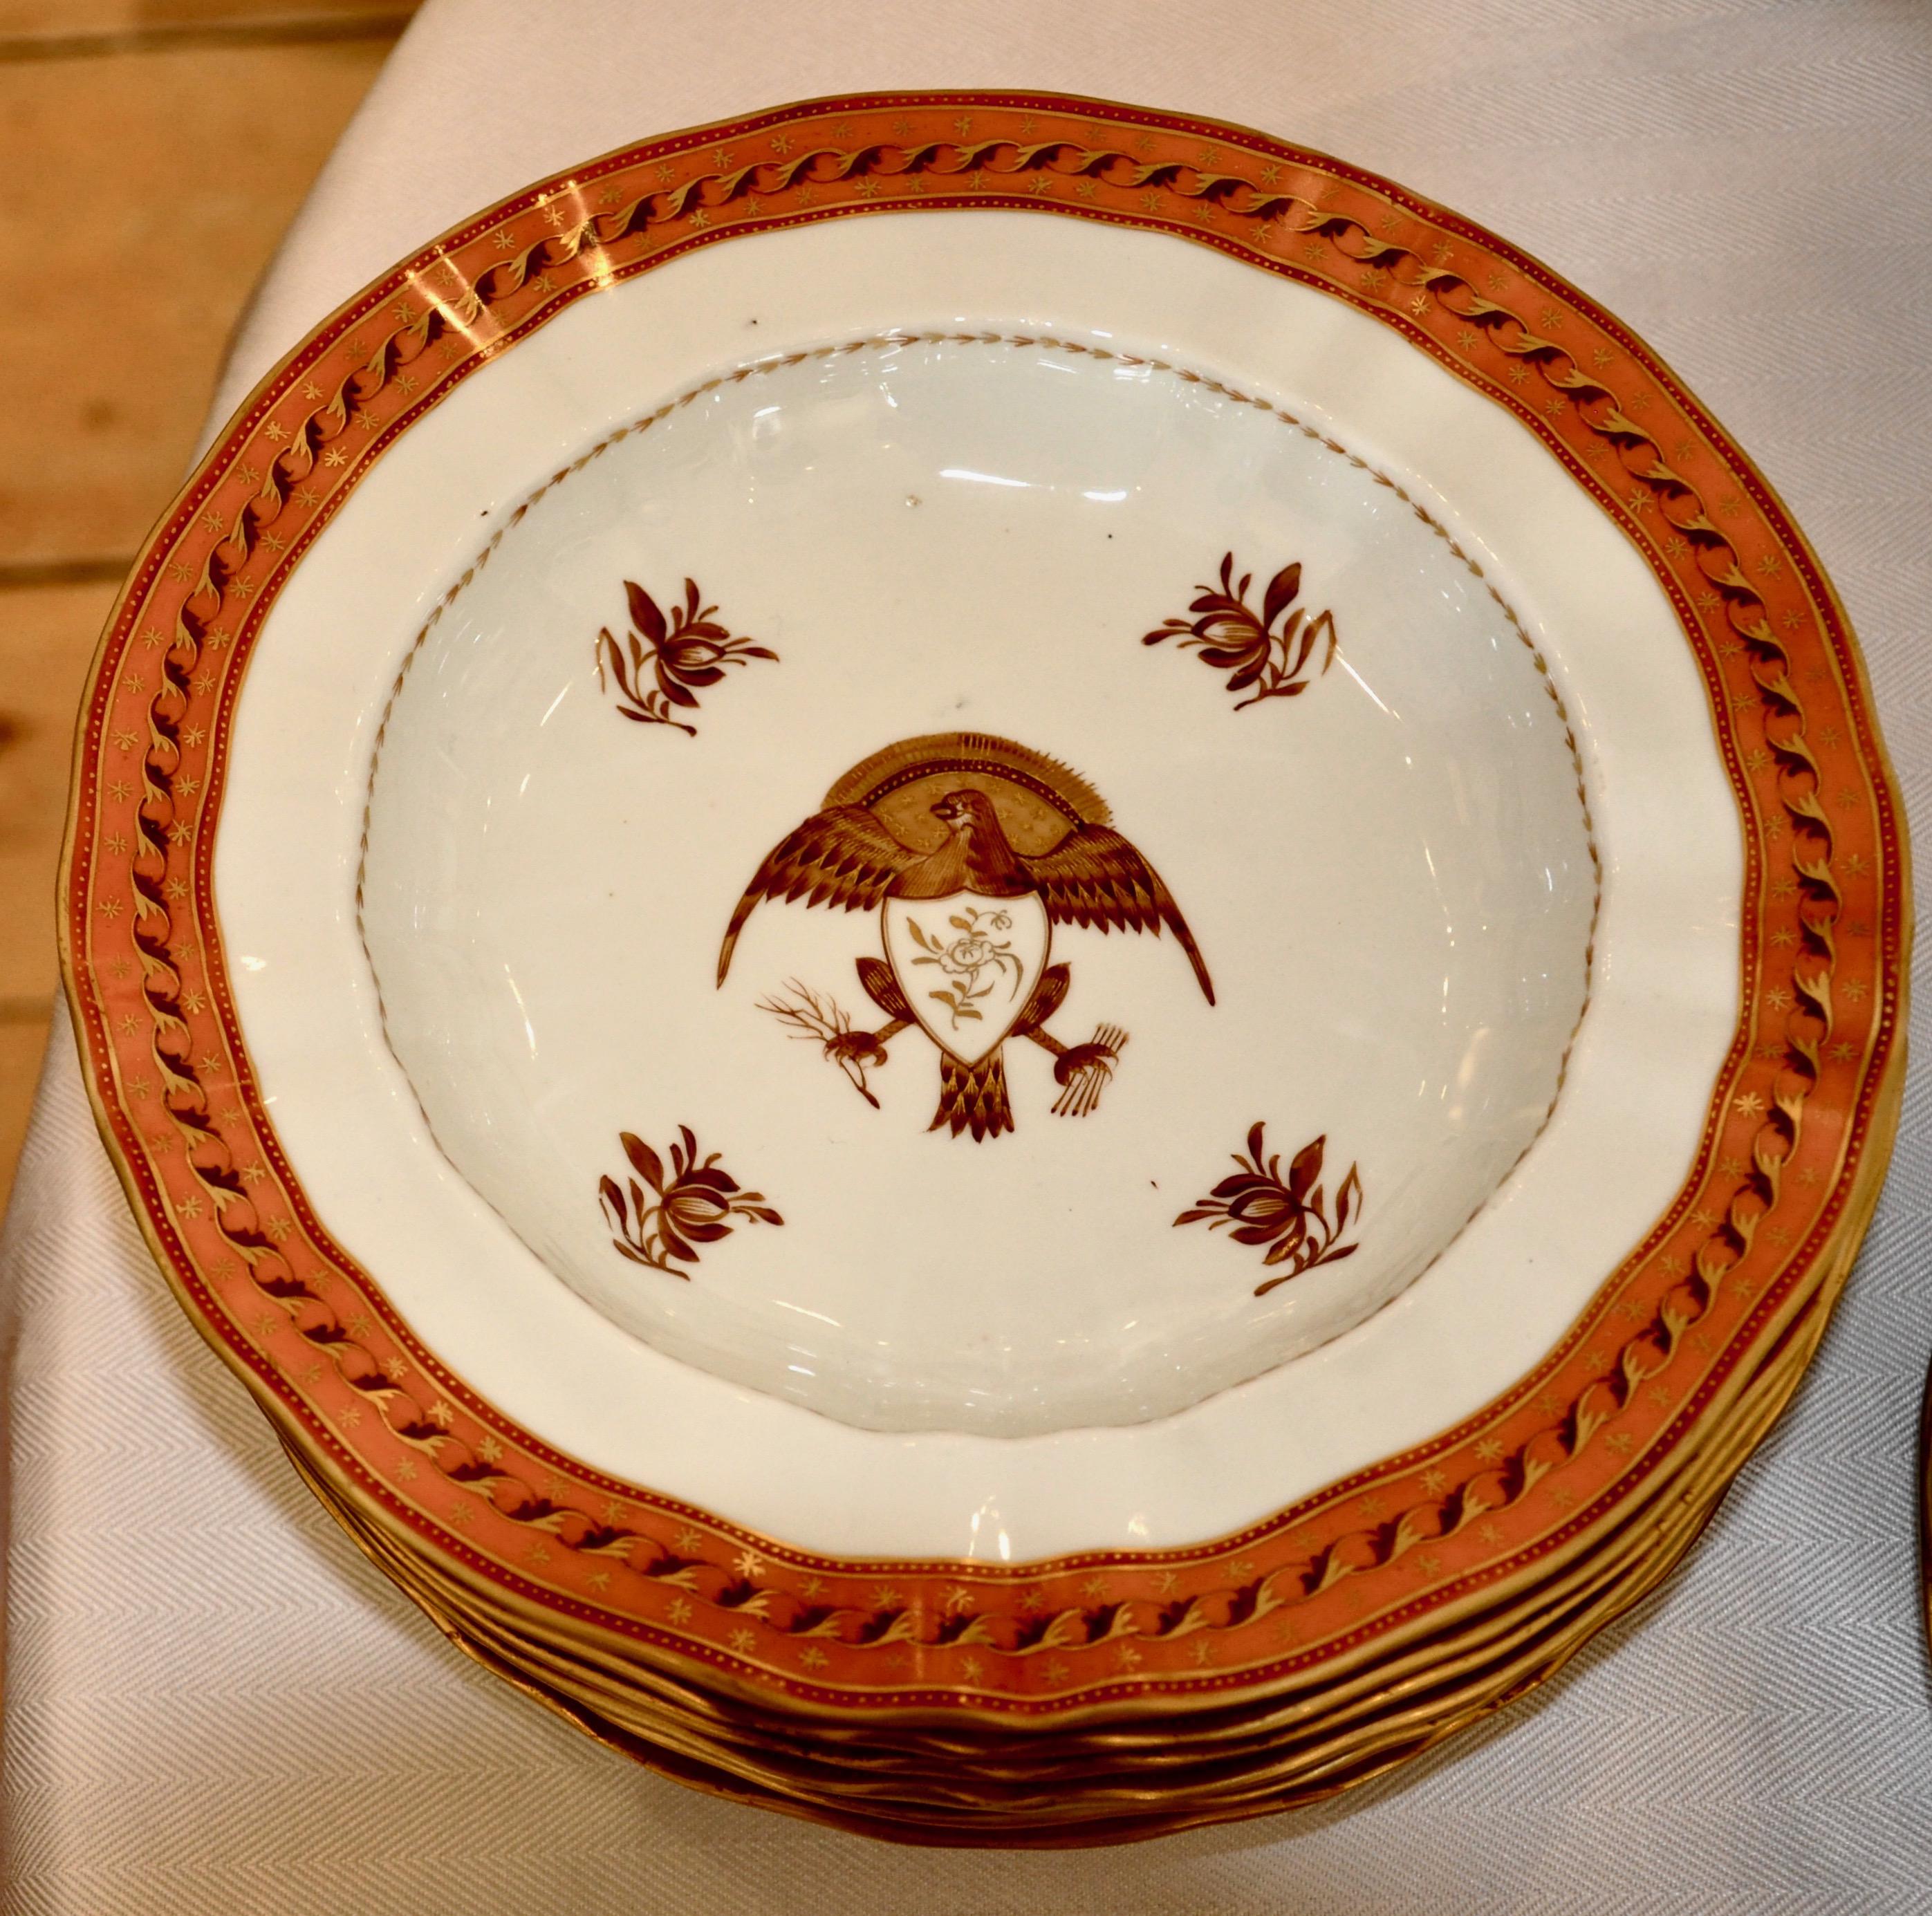 Partial set of Samson hand painted Chinese Export style porcelain for the American Market.

In beautiful orange trim with hand printed gilt motif. American eagle in centre with Shield. 20th century, in tones of rust and brown with gold accents